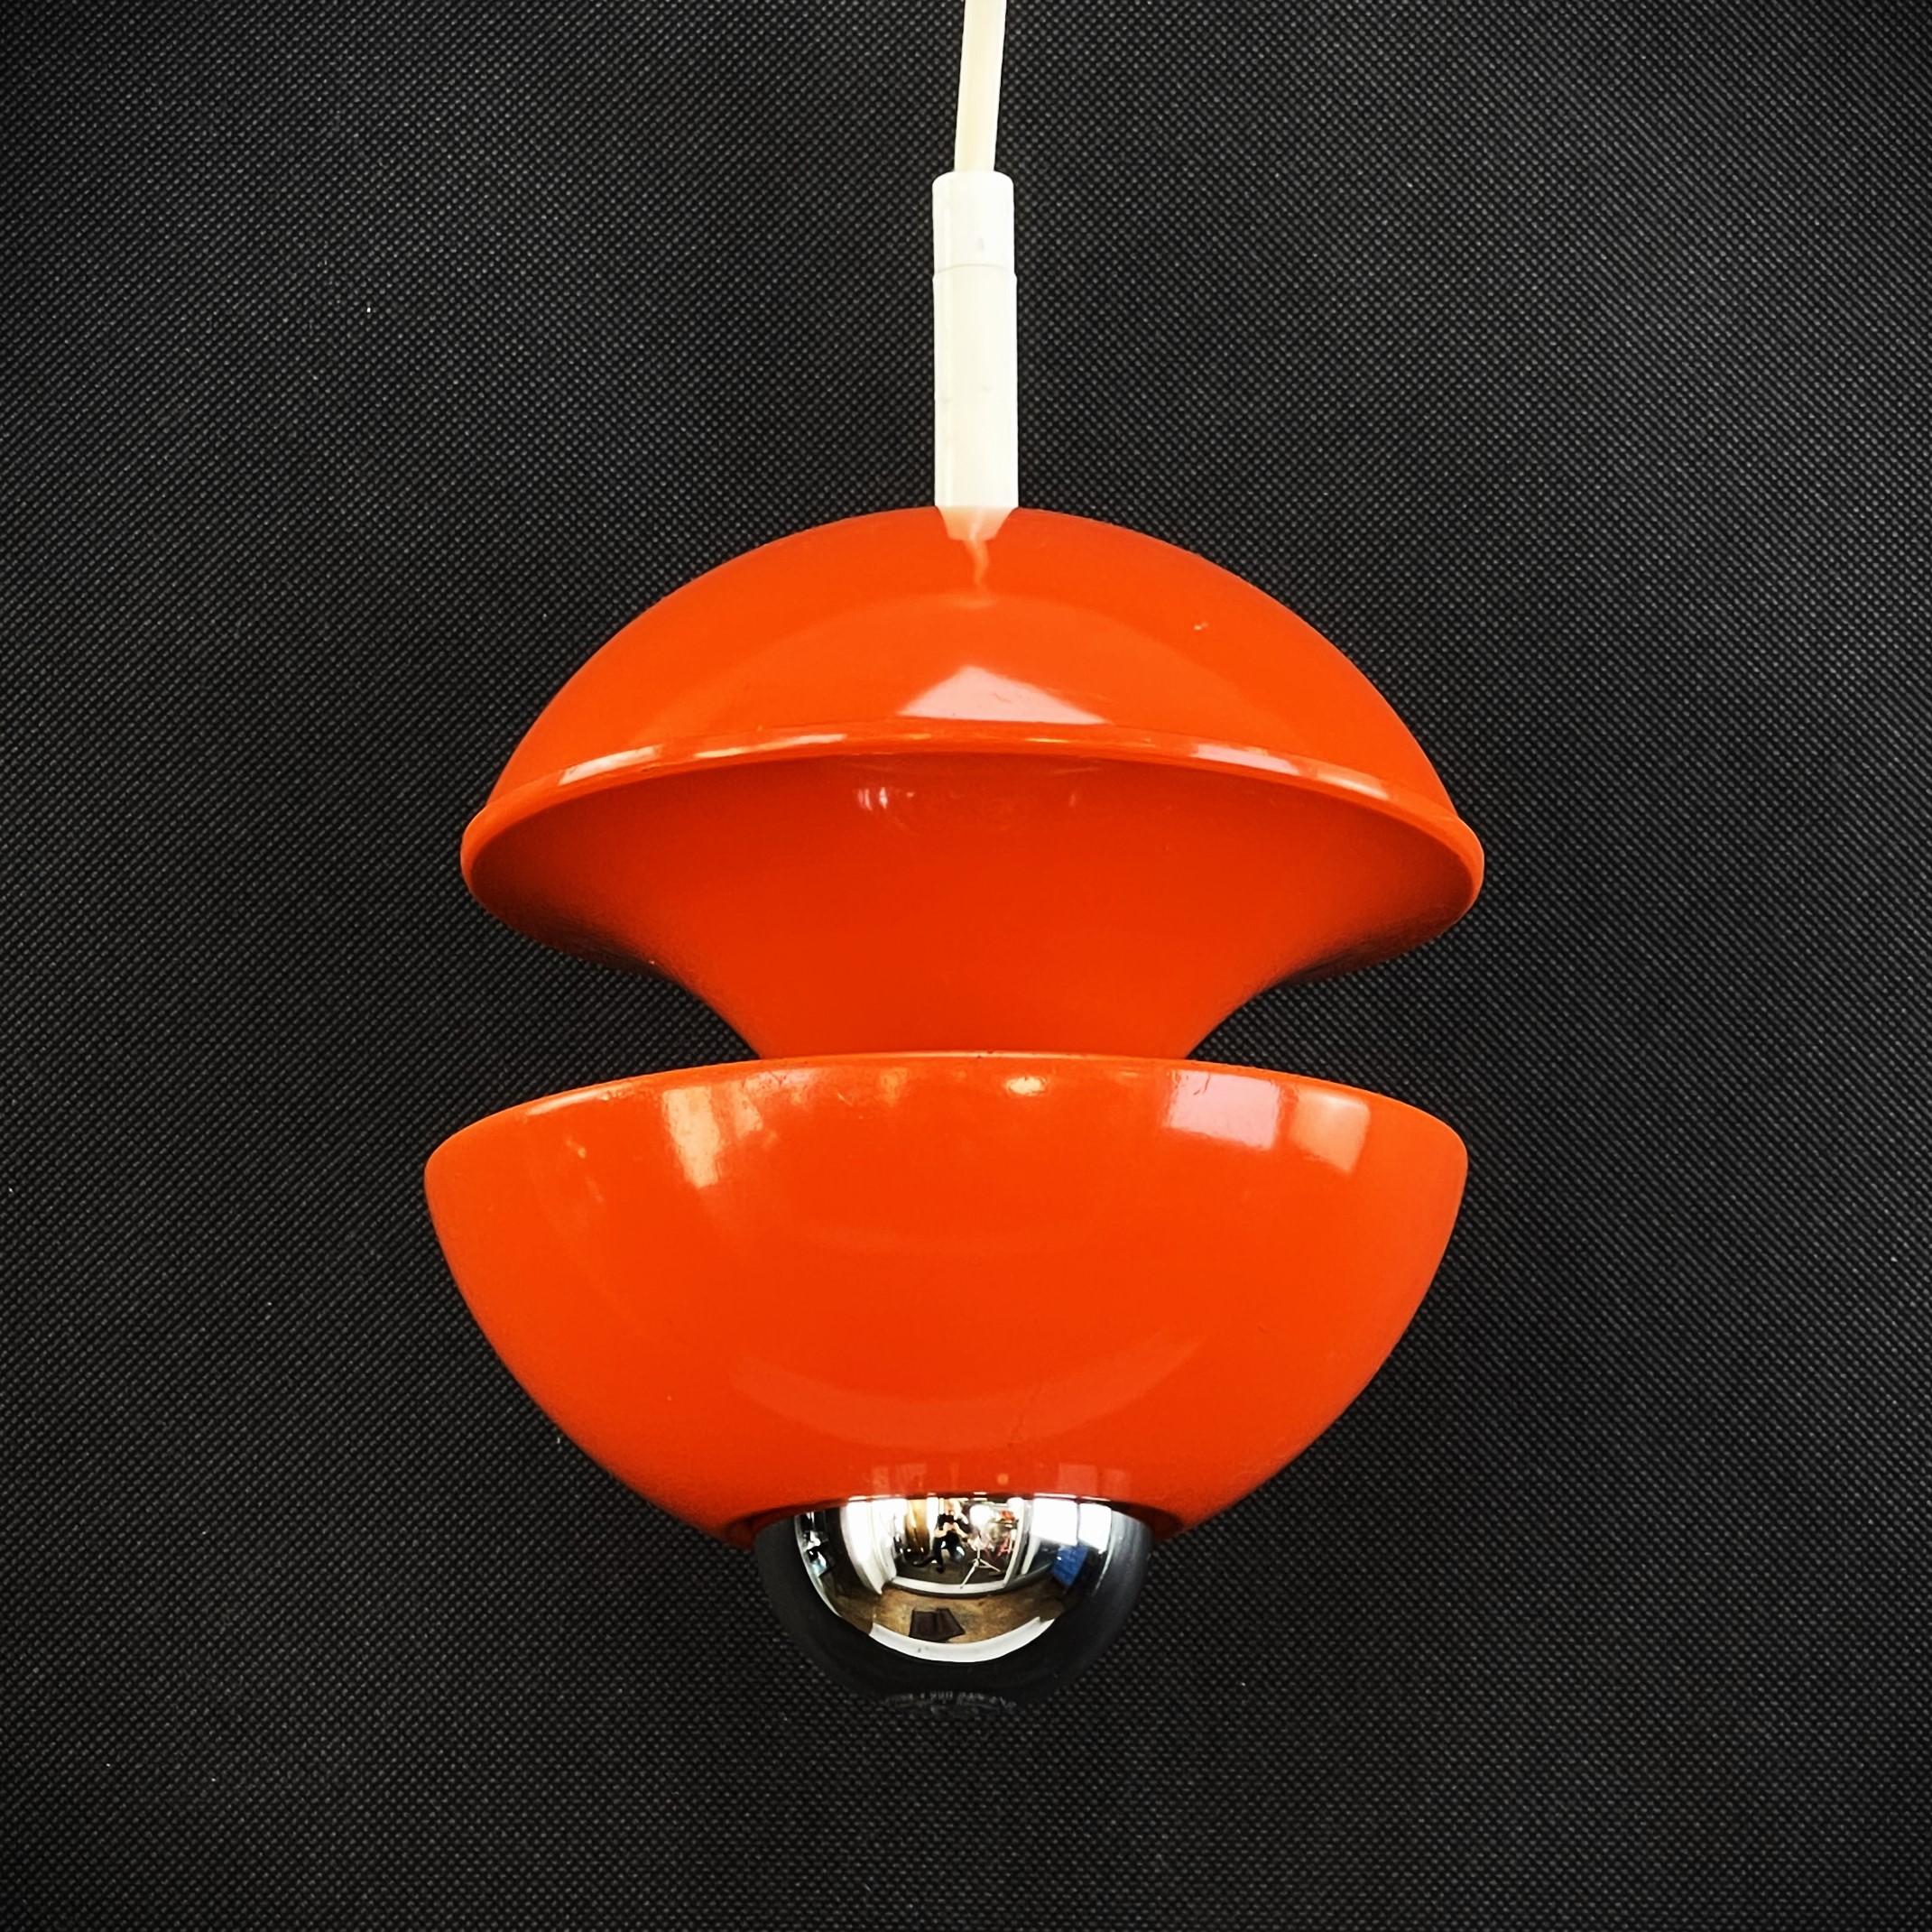 beautiful SPACE Age ceiling light by Richard Essig- 1970s

The pendant lamp from Kaiser Leuchte, designed by Klaus Hempel in an eye-catching orange shade, is an outstanding example of contemporary lamp design. With a unique combination of shape,